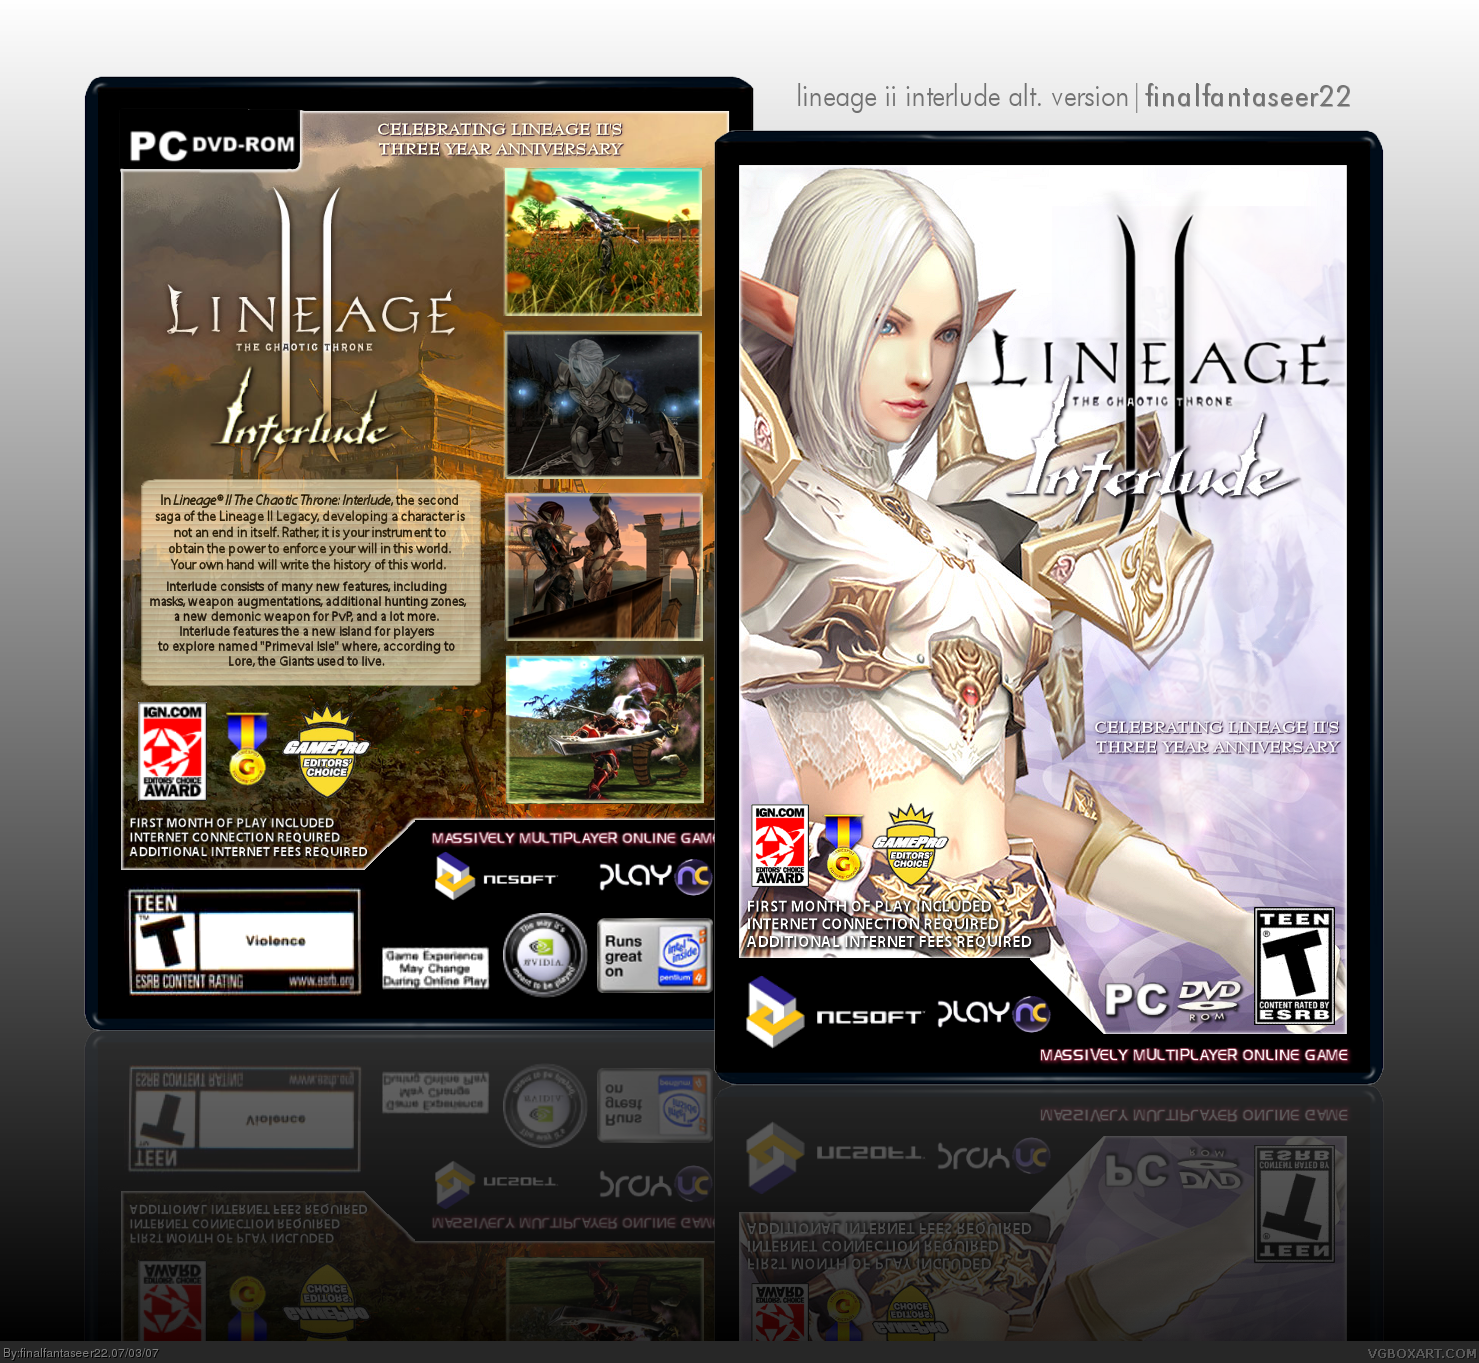 Lineage II The Chaotic Throne: Interlude box cover